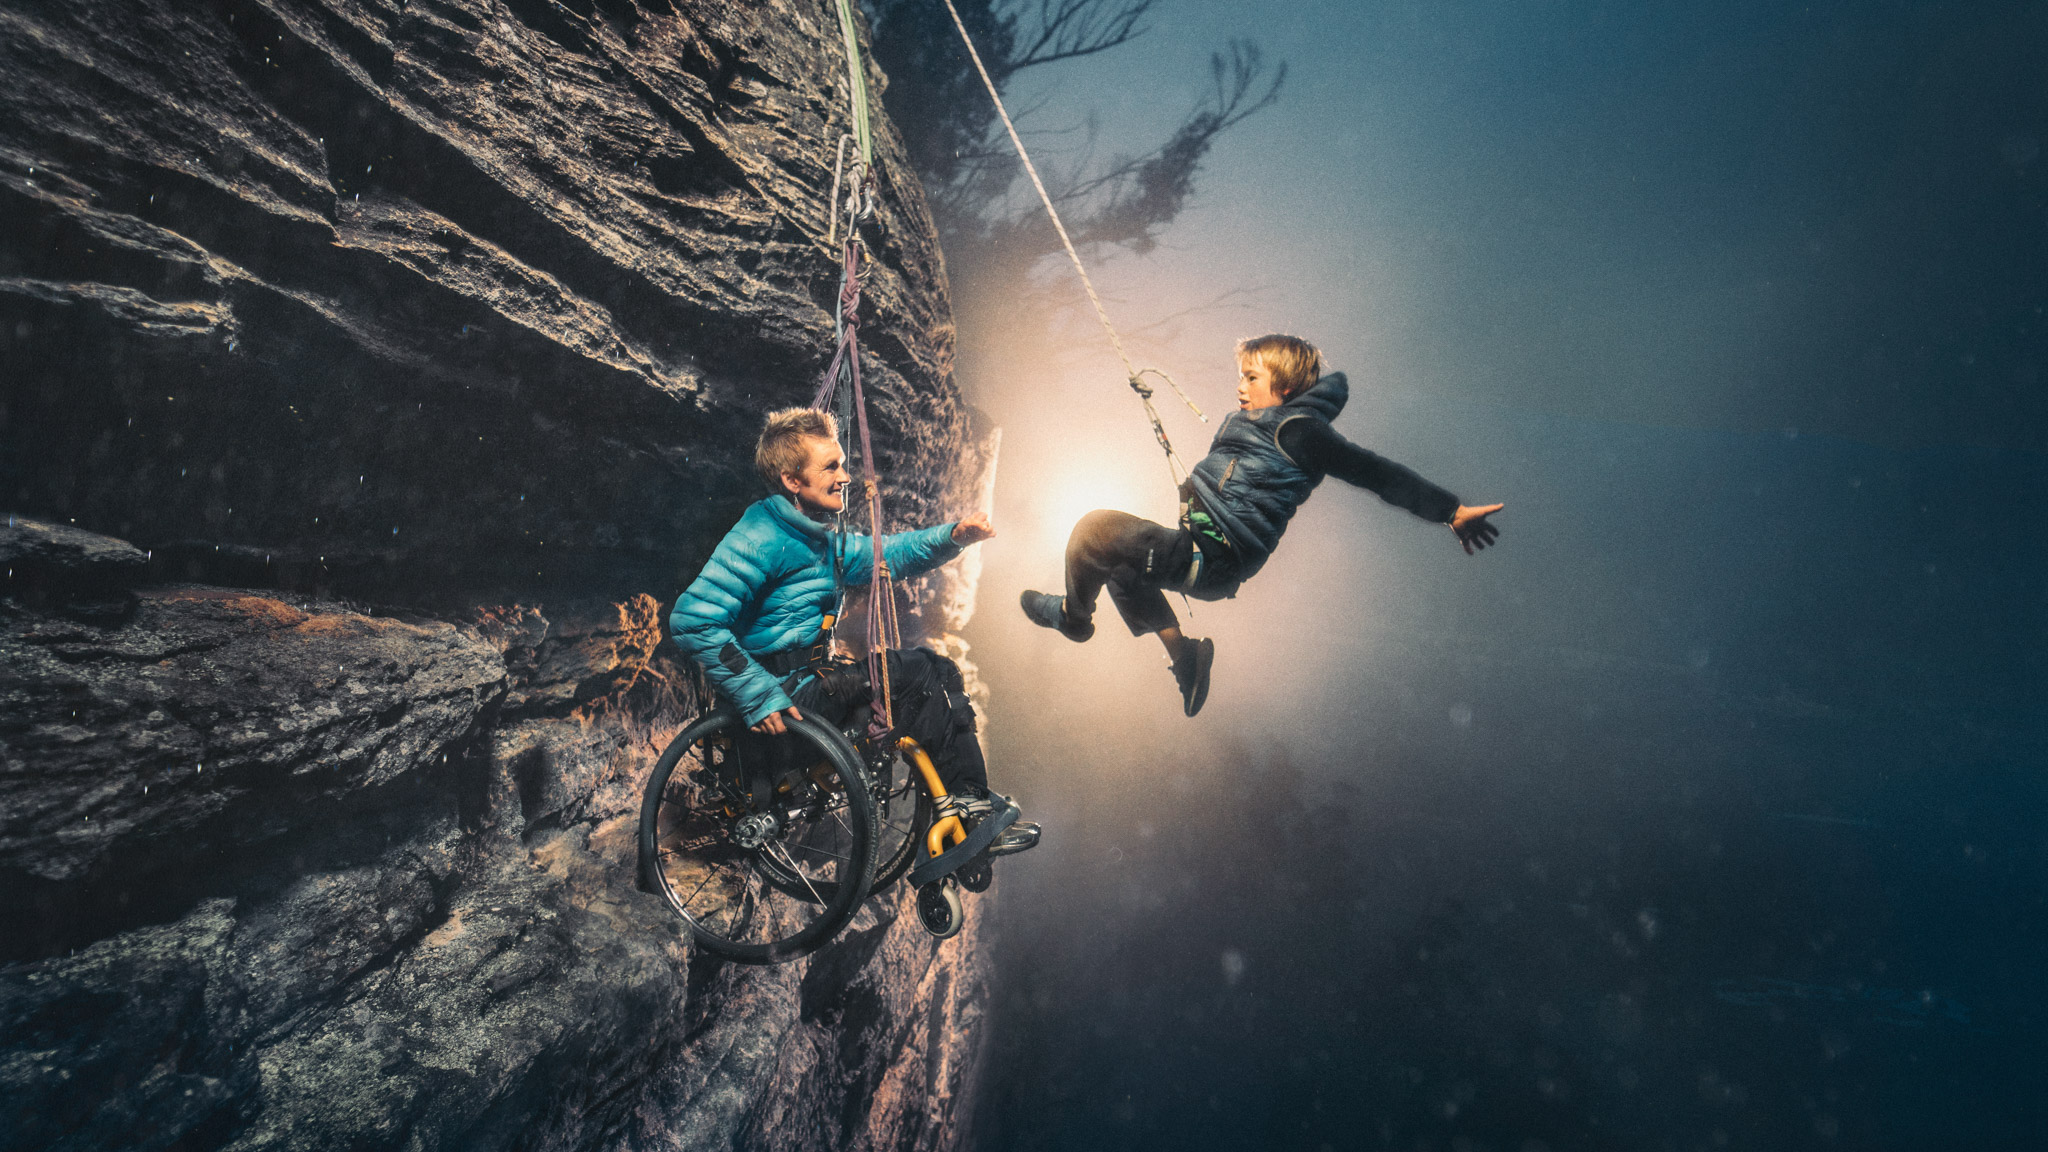 A mother shares her love of adventure with her son: Digital ...